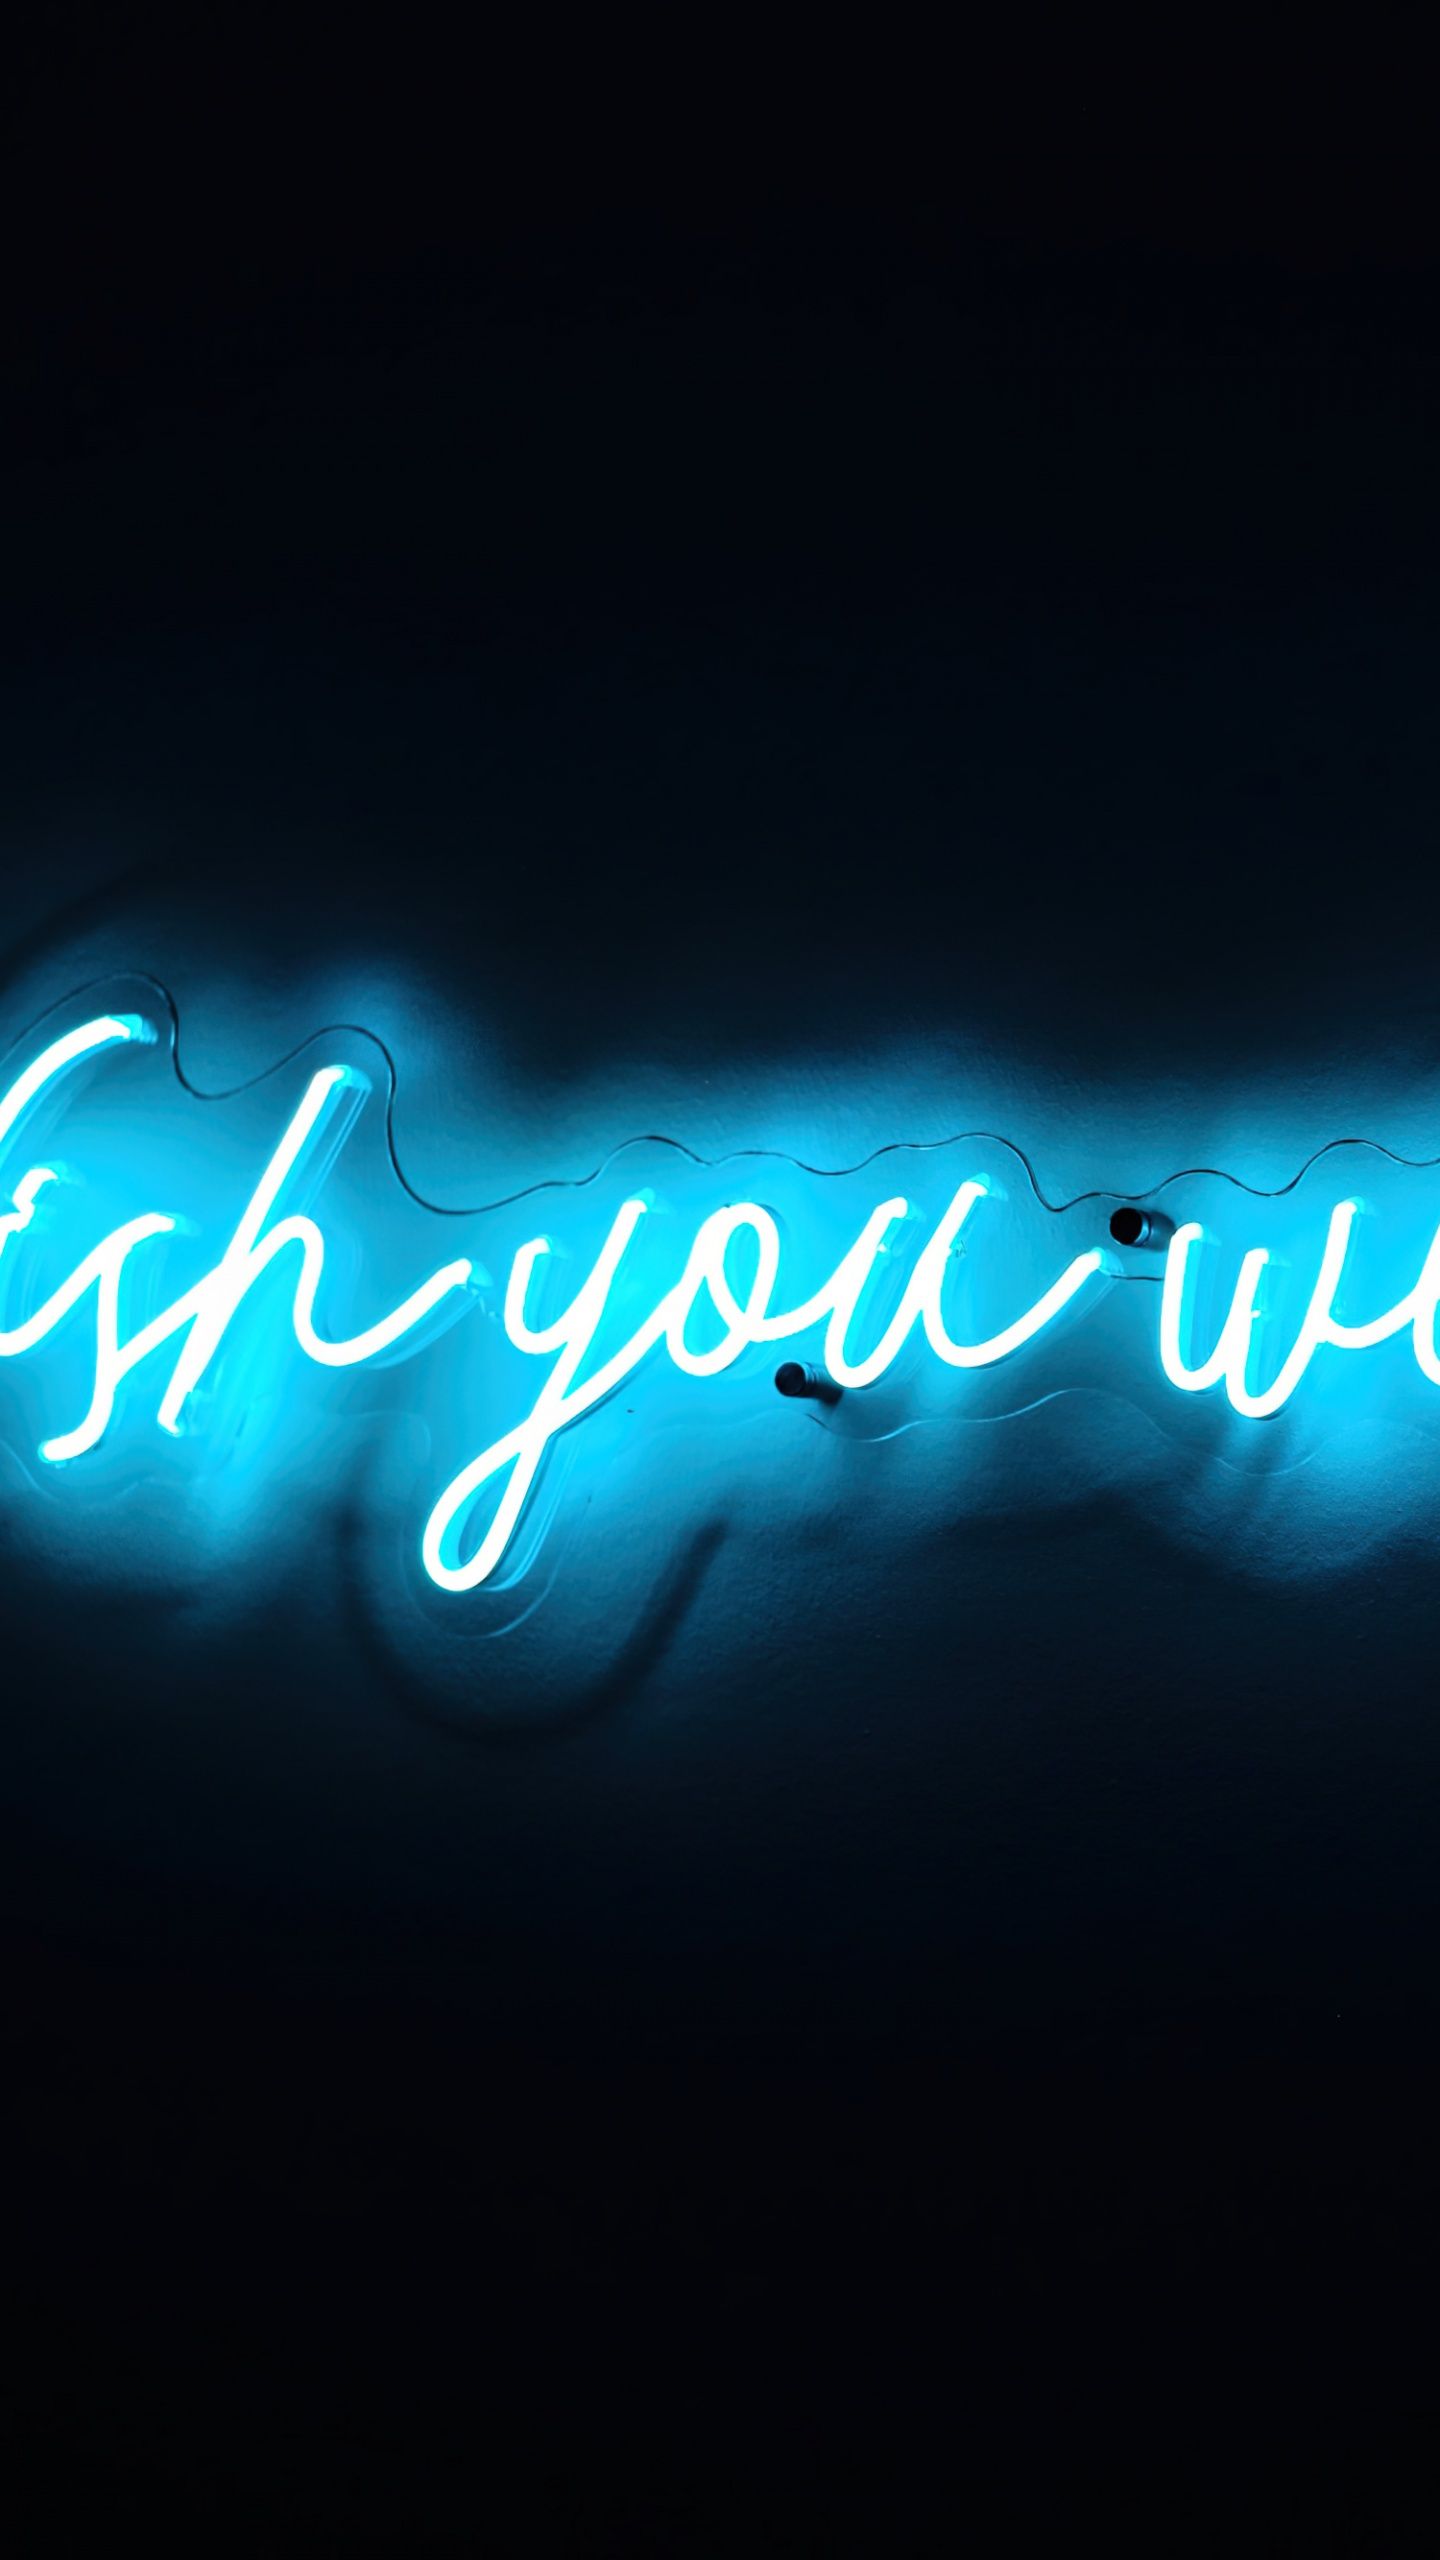 A neon sign that says kiss you well - Turquoise, sad quotes